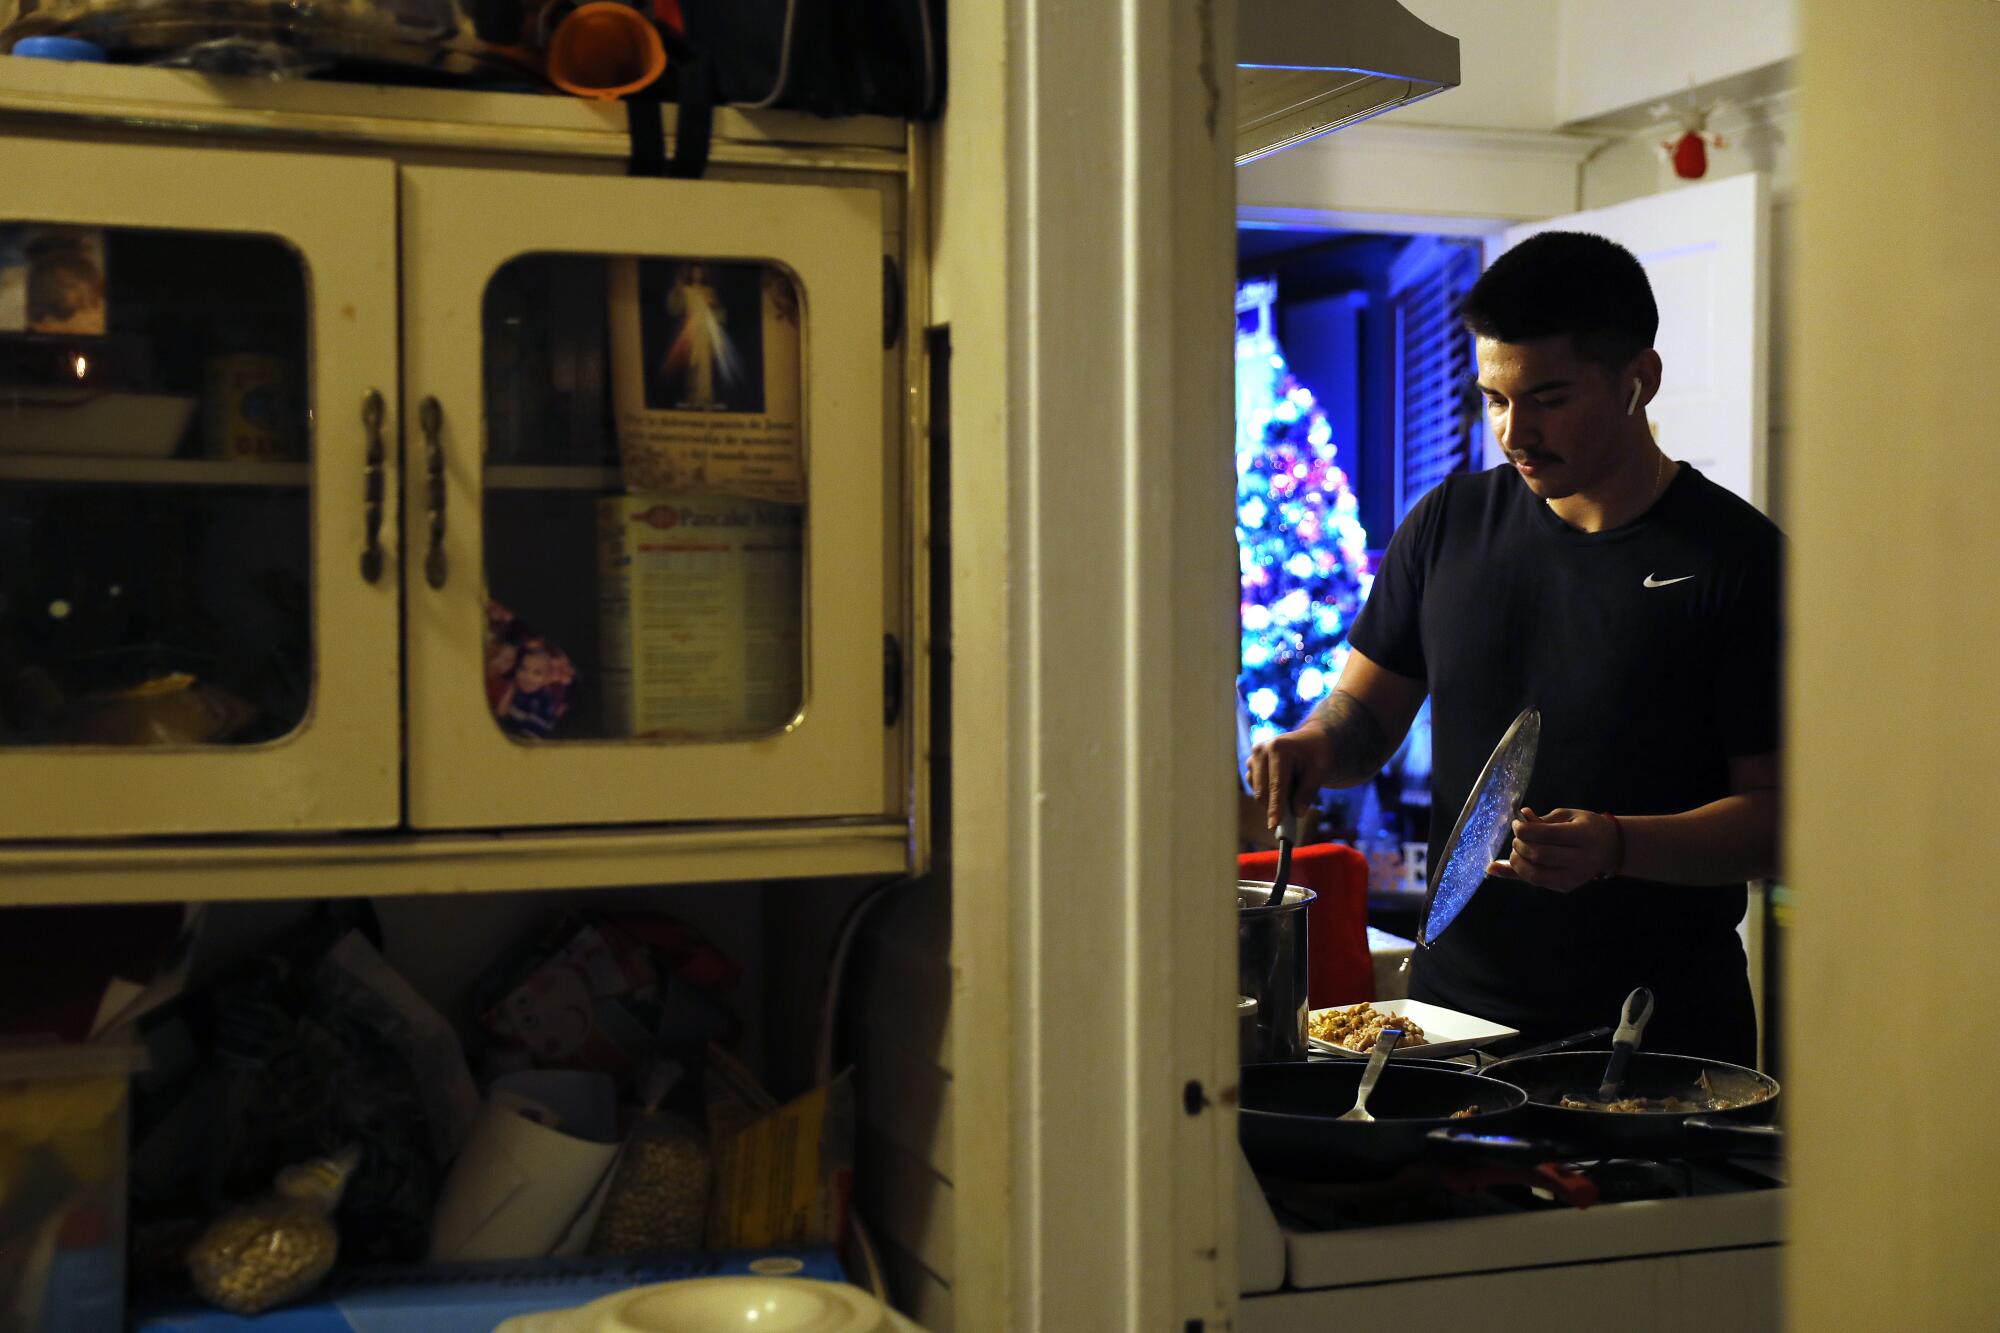 Roosevelt quarterback Damian Avalos makes dinner at home in Boyle Heights after a day of training.